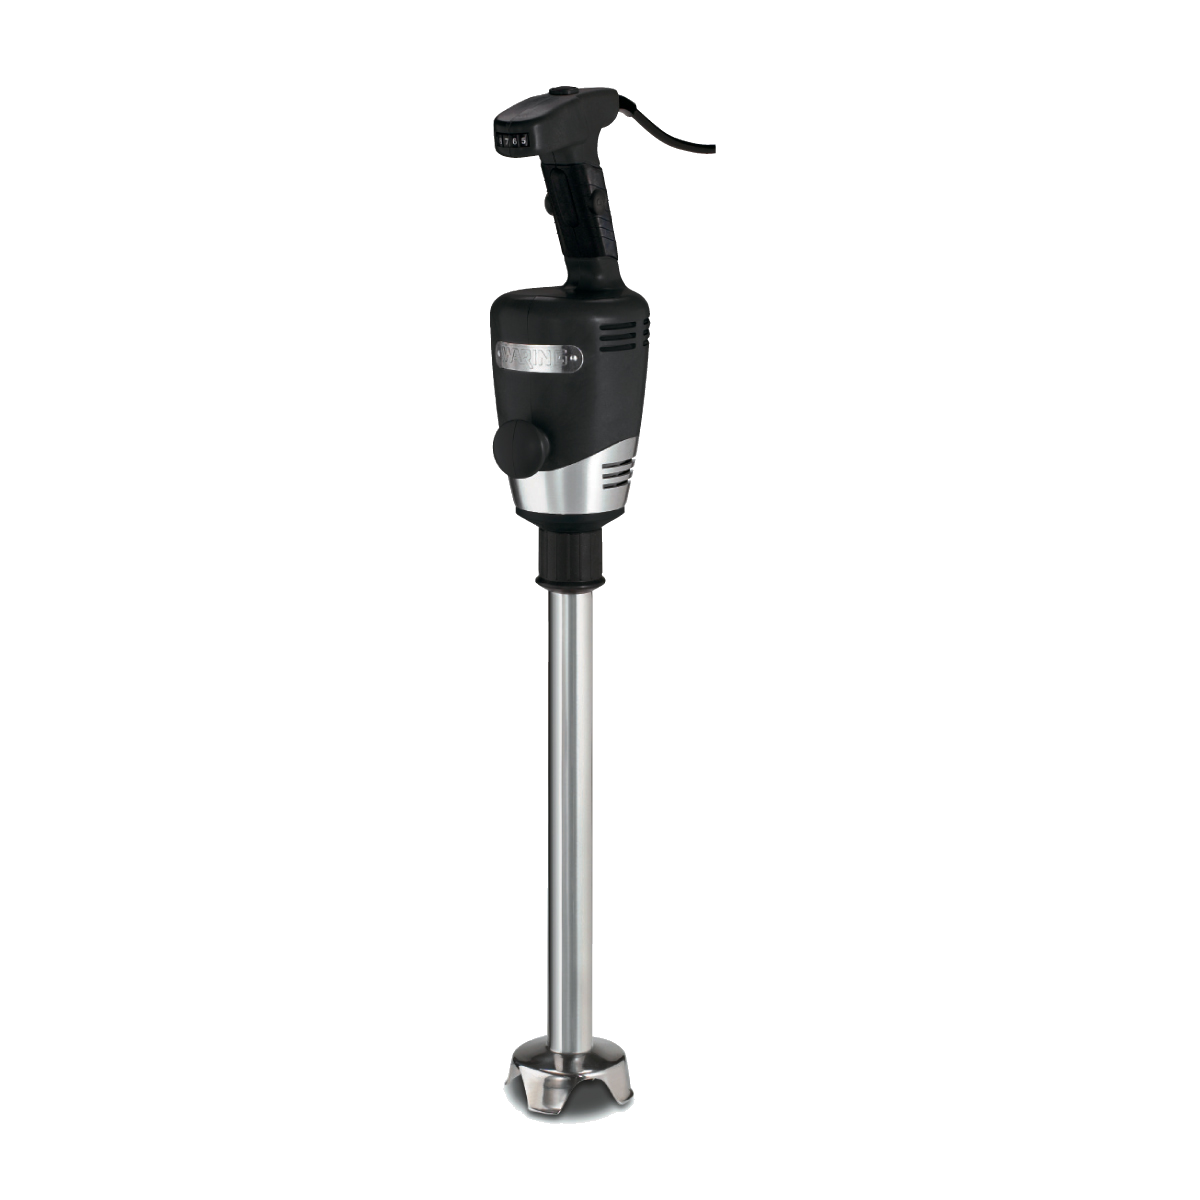 https://www.waringcommercialproducts.com/files/products/wsb60-waring-immersion-blender-main.png